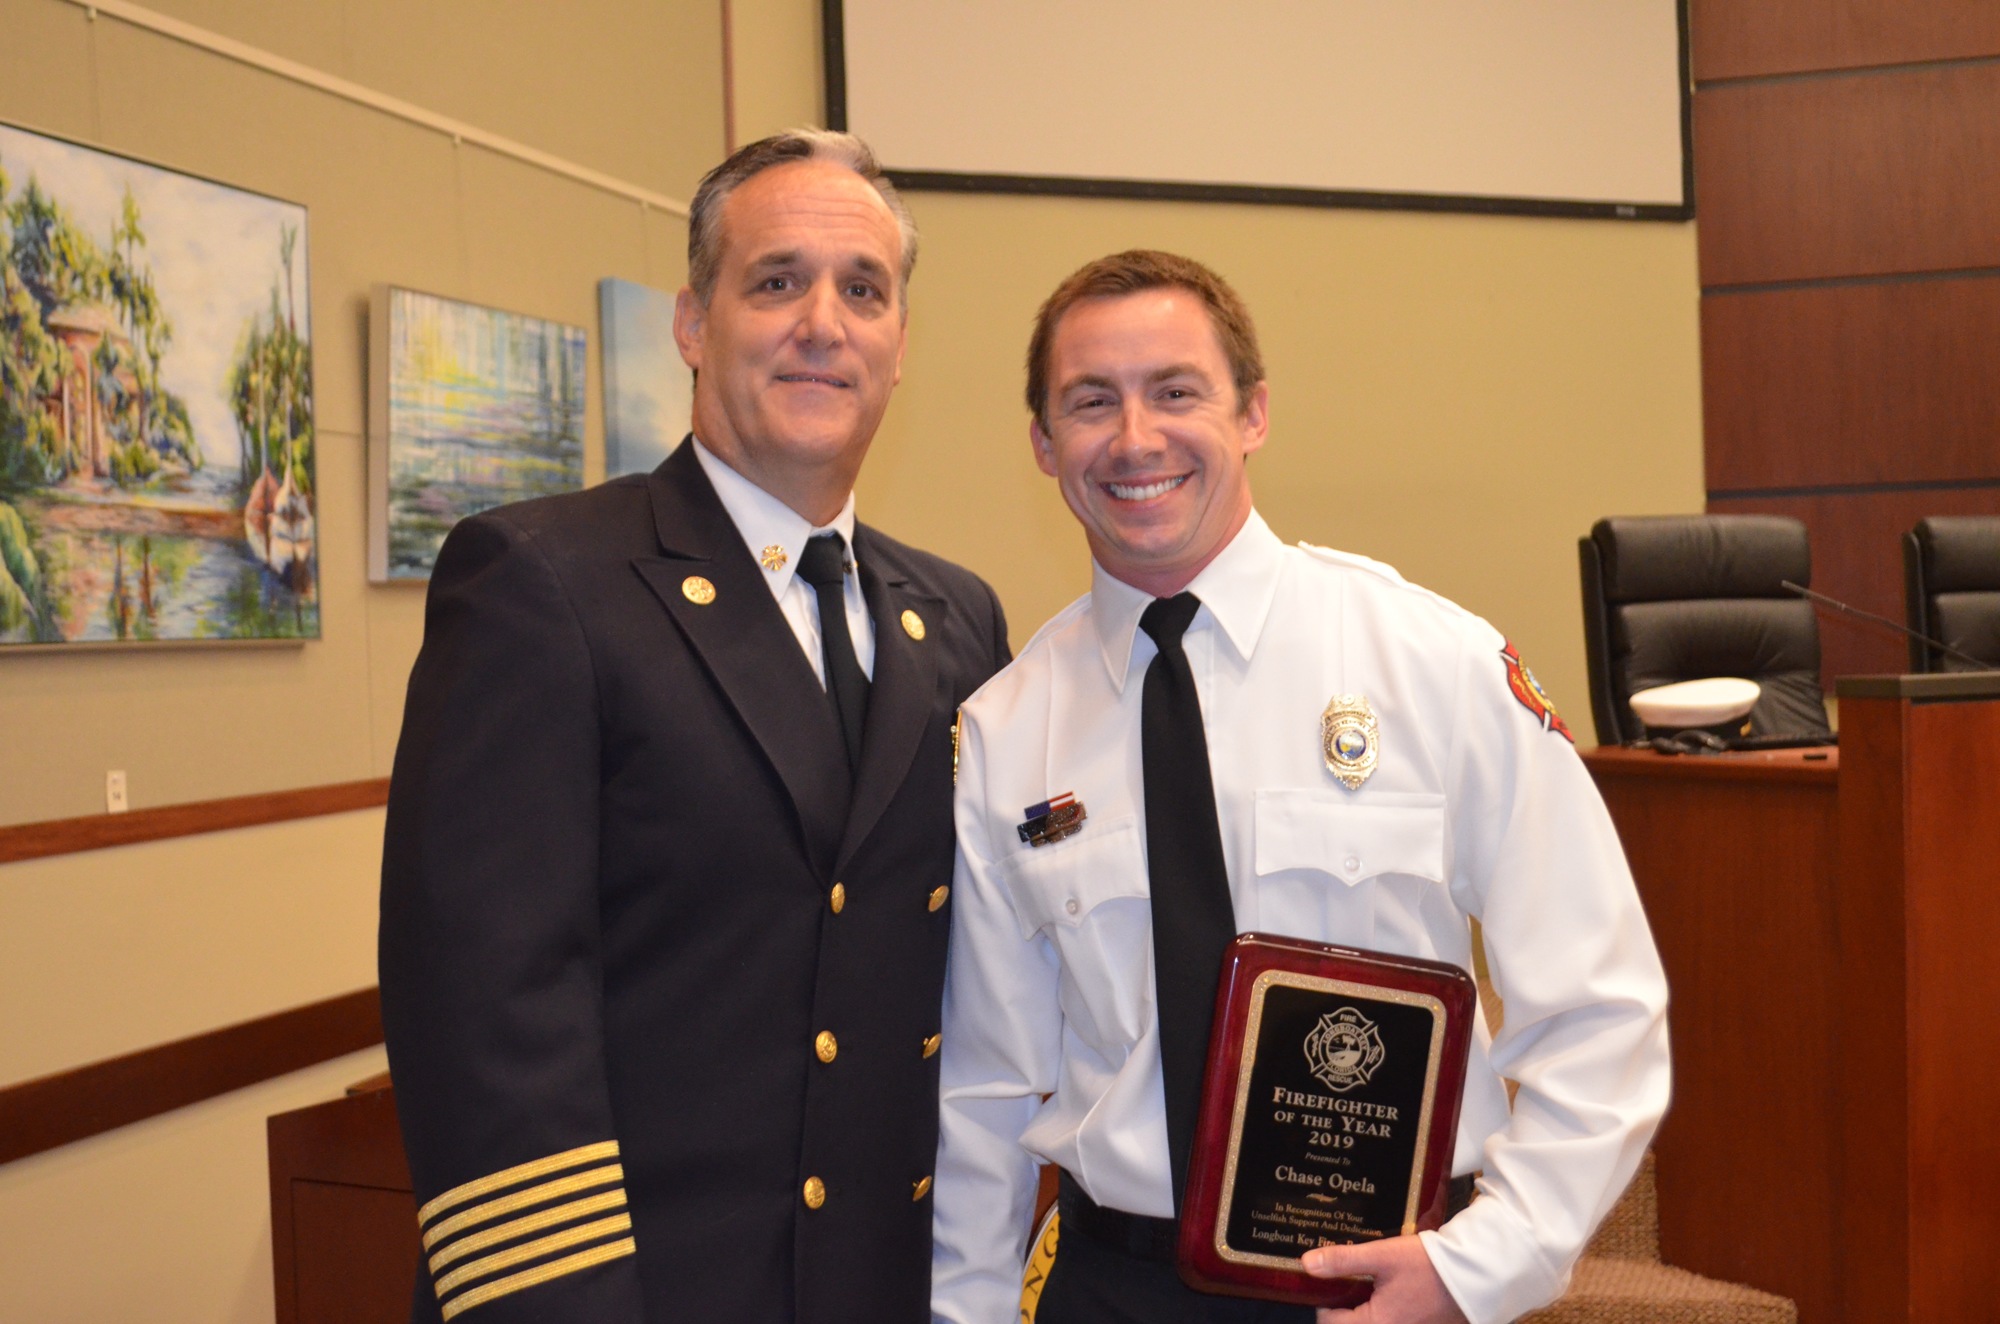 Chase Opela, the department's firefighter of the year.